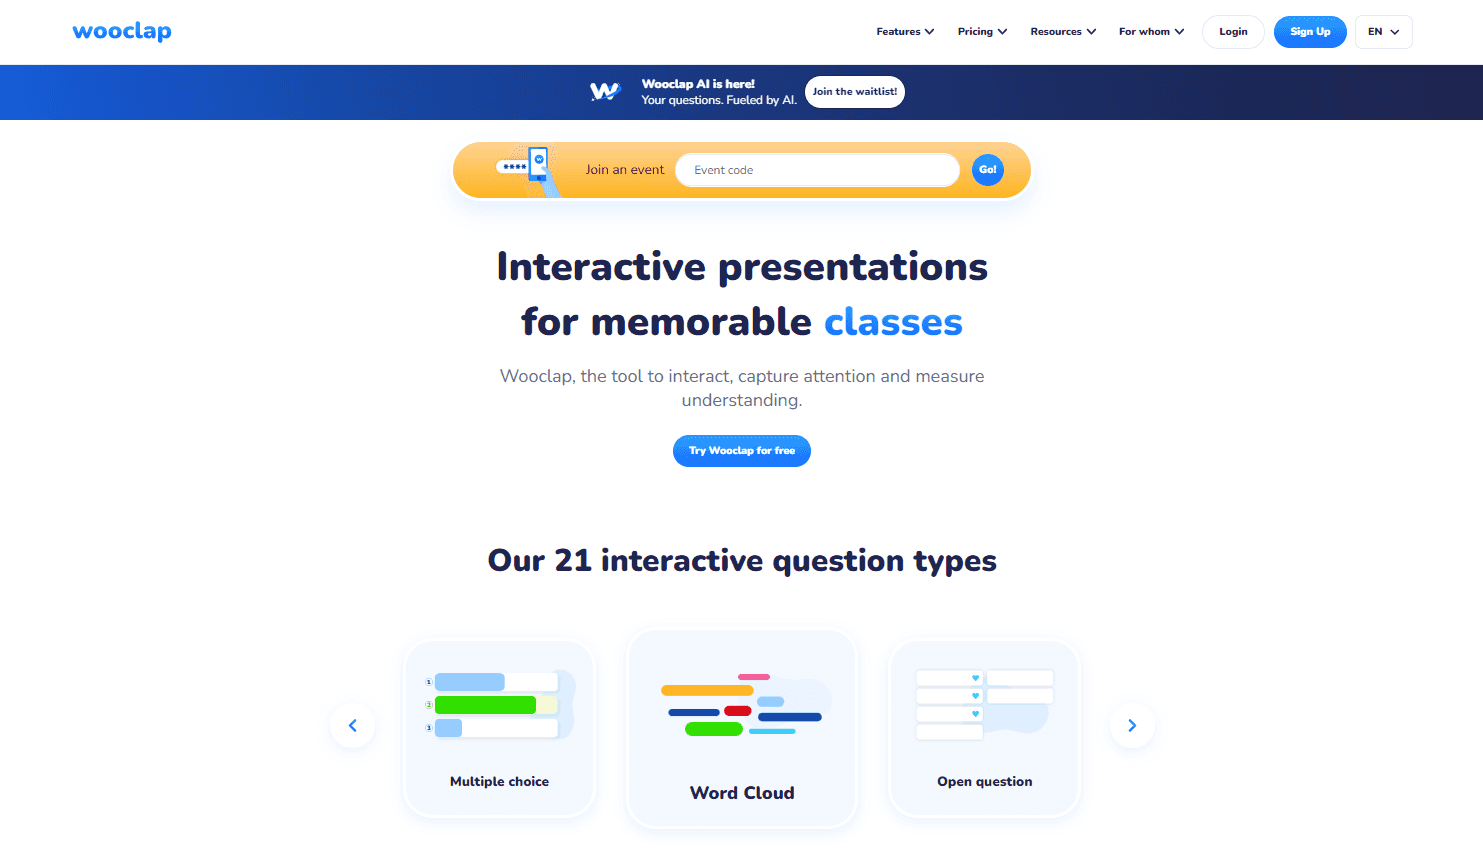 Wooclap's homepage allows users to join events, alternatively, it prompts them to try Wooclap for free.